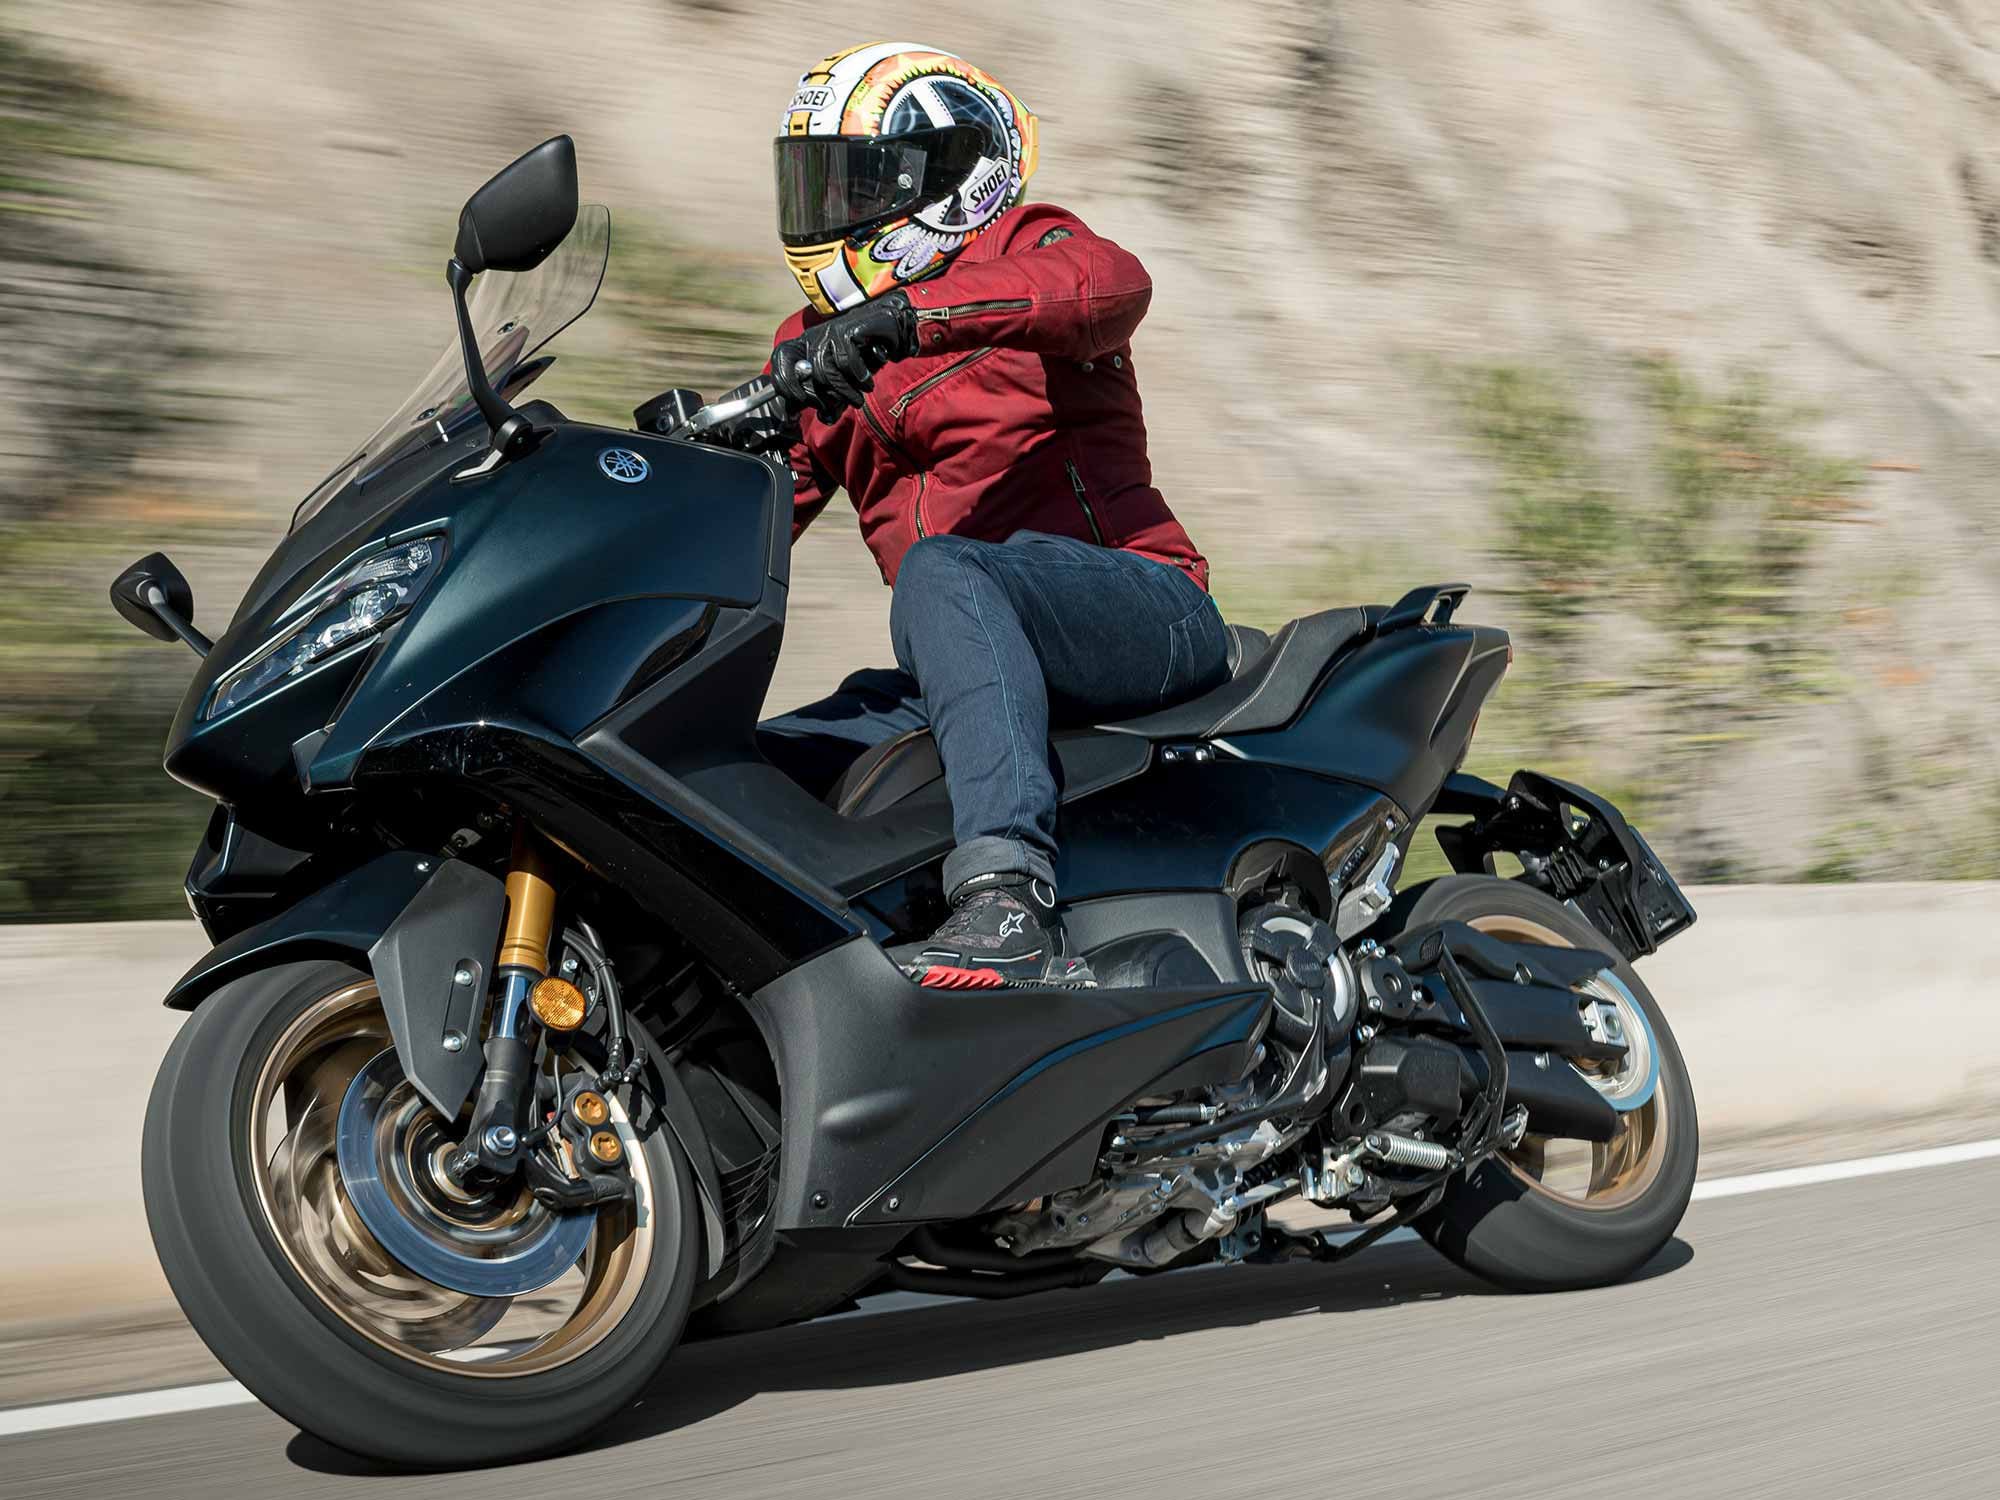 It’s not available here in the US, but the Yamaha TMAX has long been the king of the maxi-scooters in Europe. Now it gets an update.